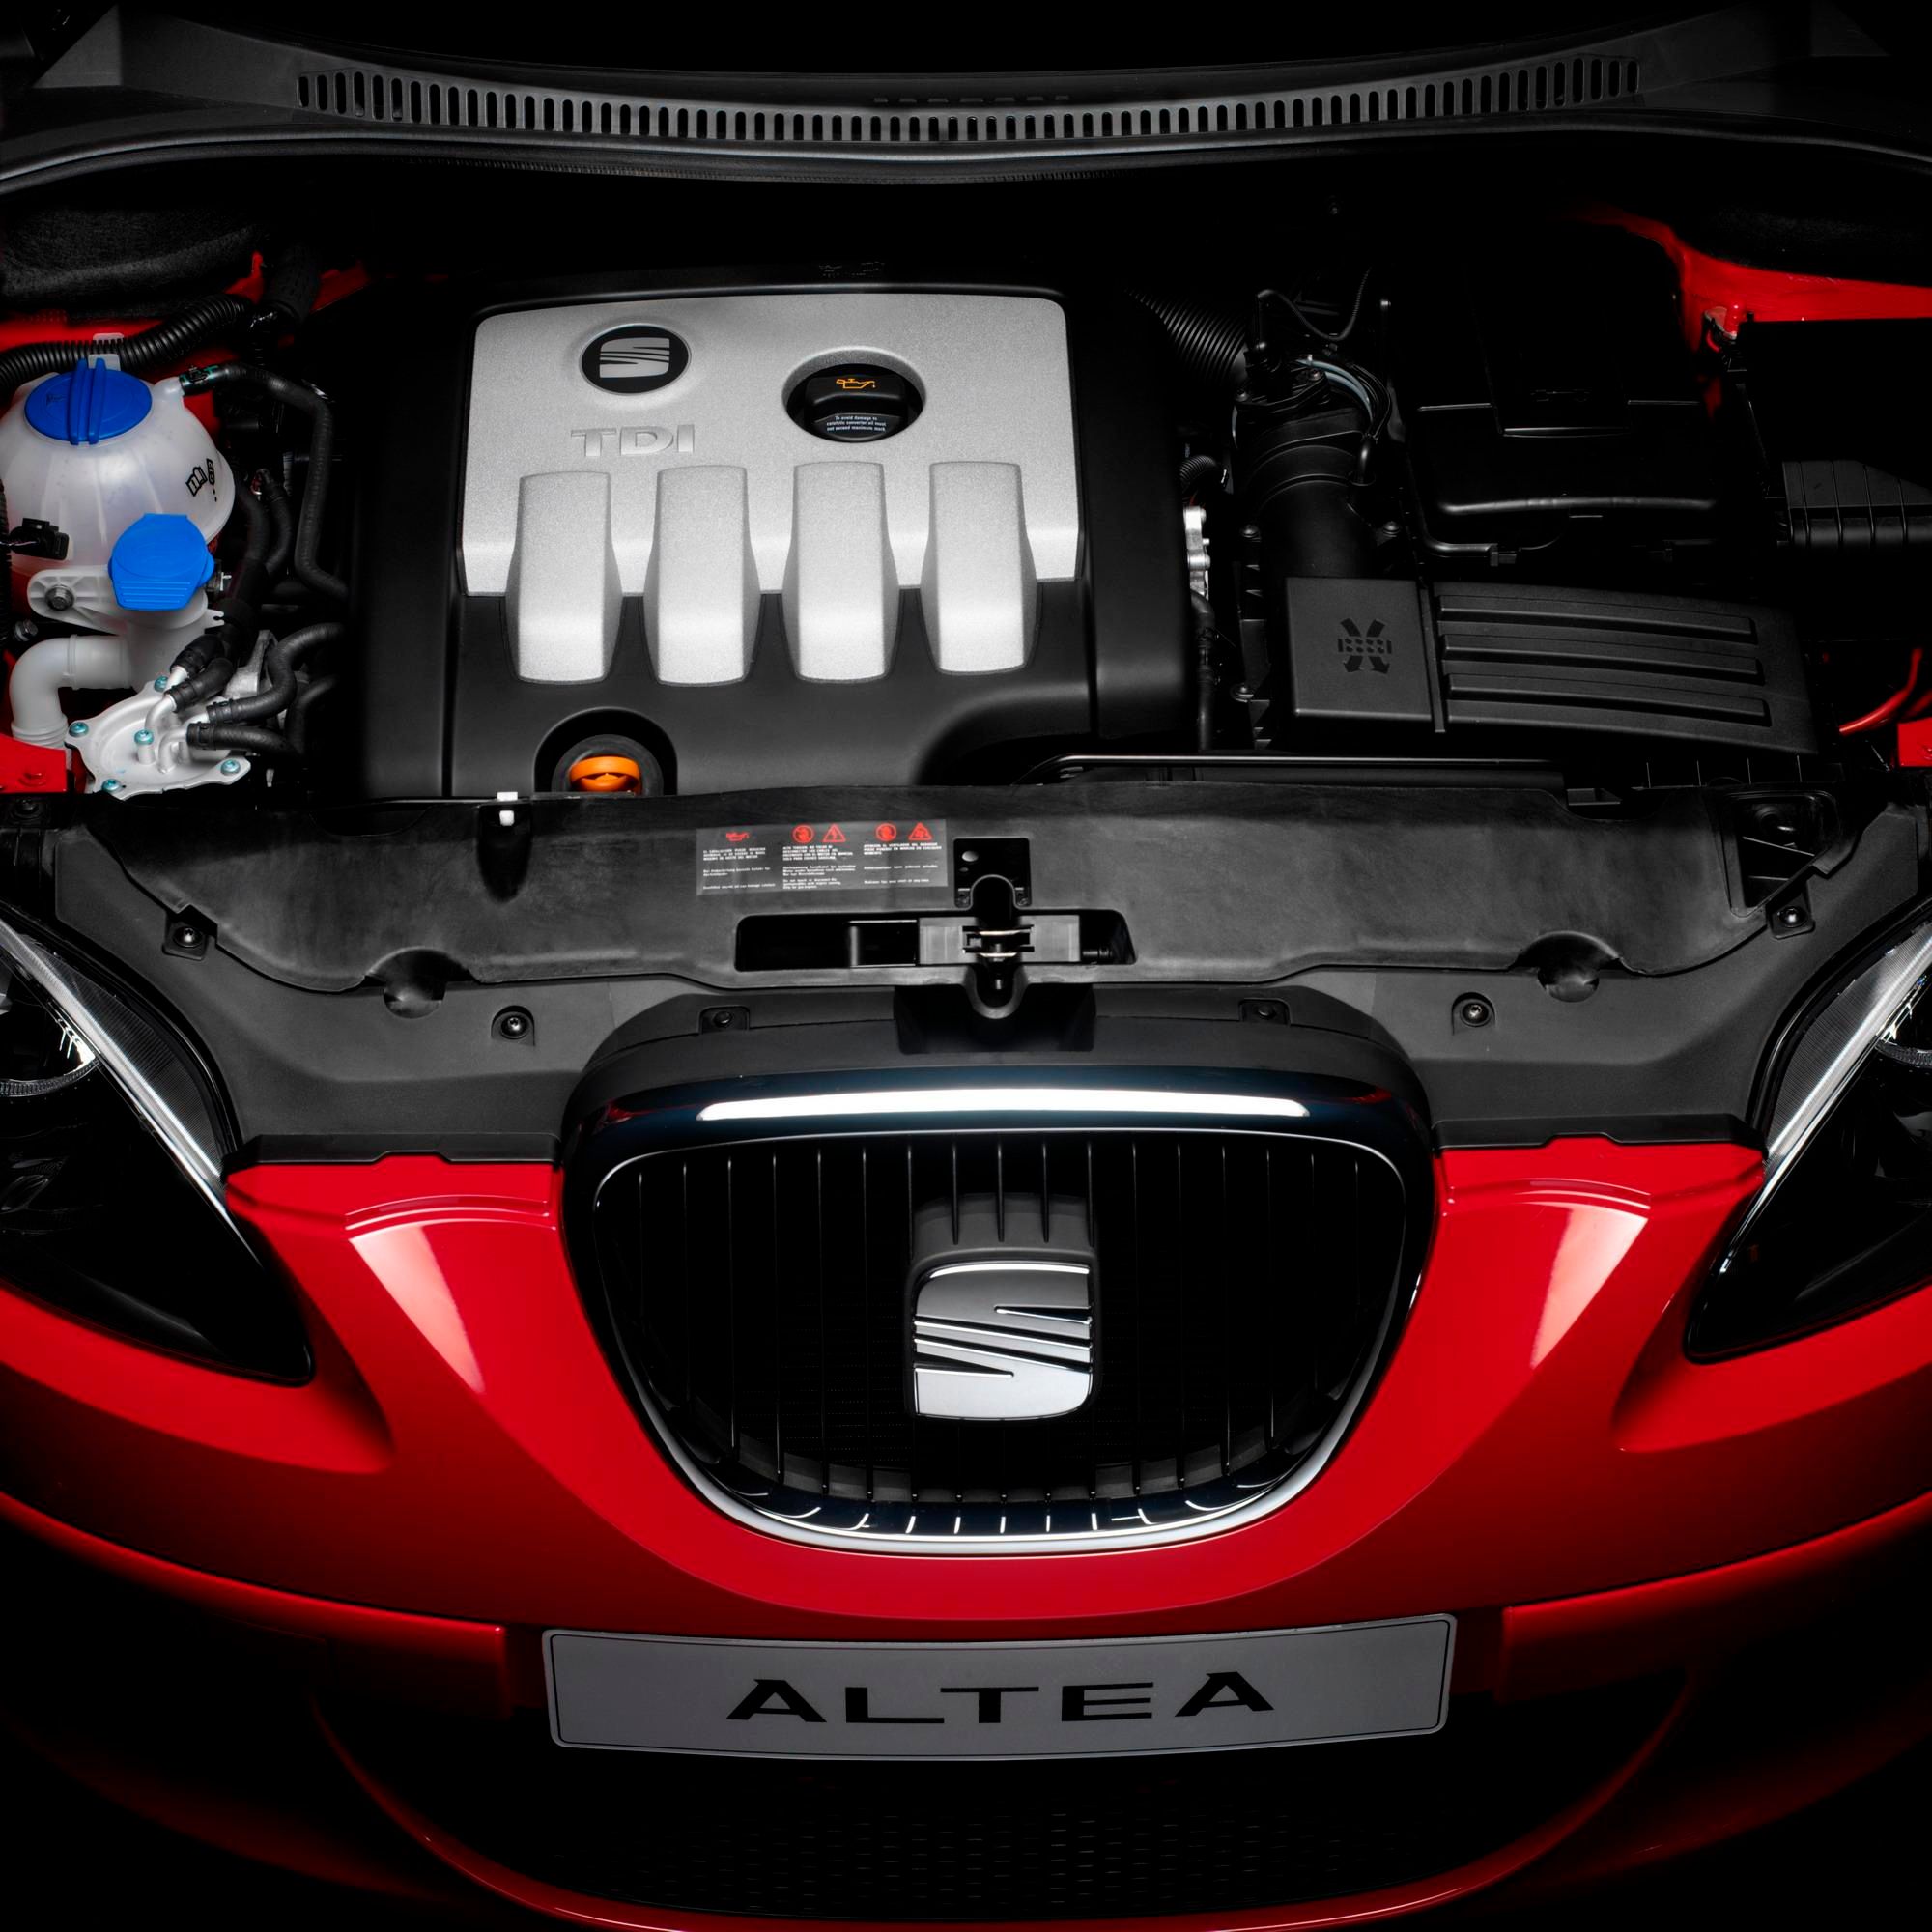 Seat Altea and Altea XL axed to make way for new SUV